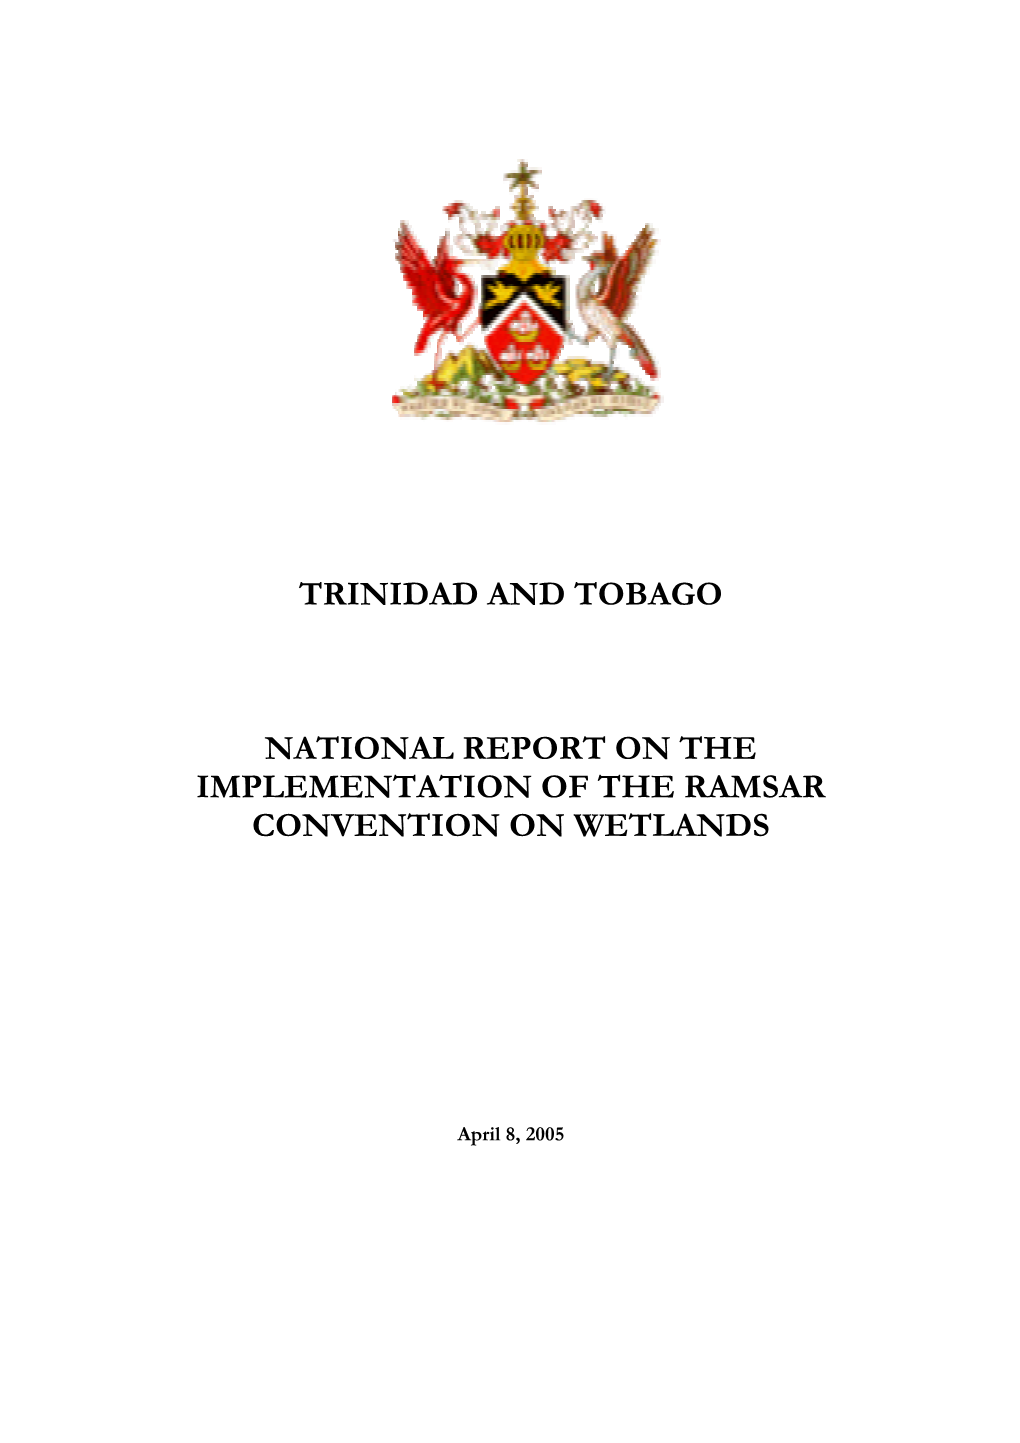 Trinidad and Tobago National Report on the Implementation of the Ramsar